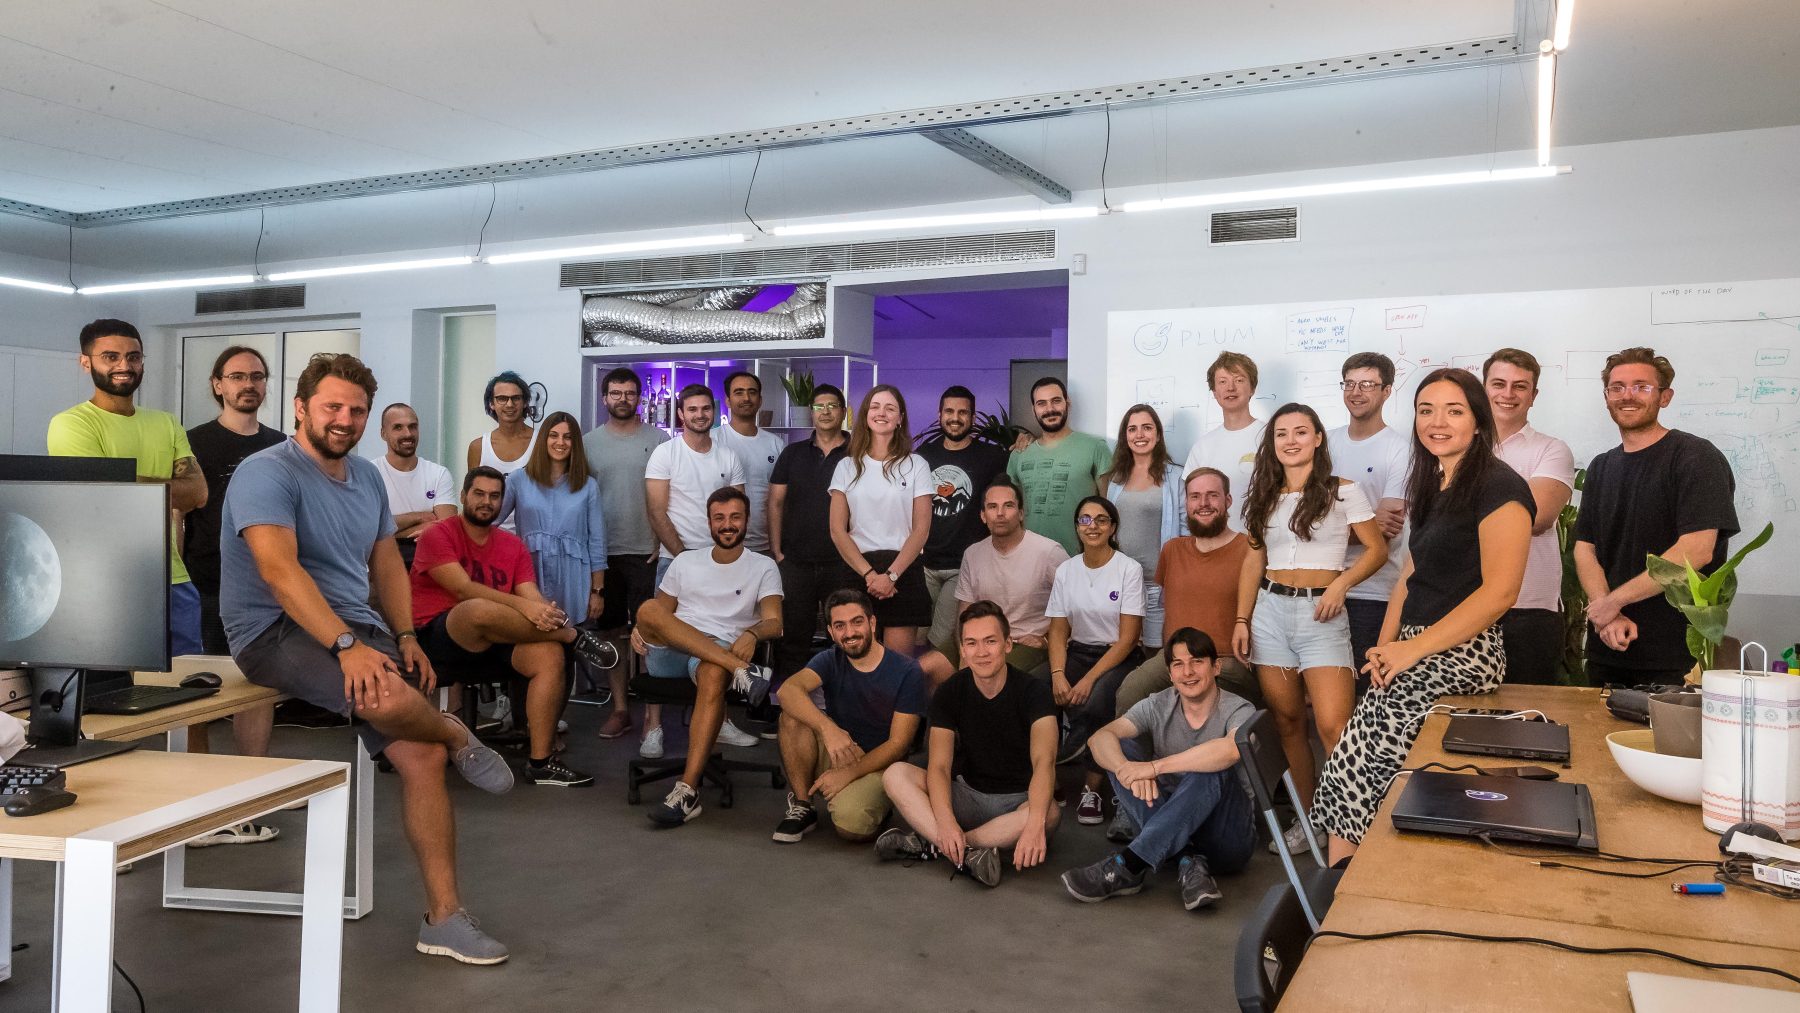 Investment app Plum crowdfunds £1m in 8 hours